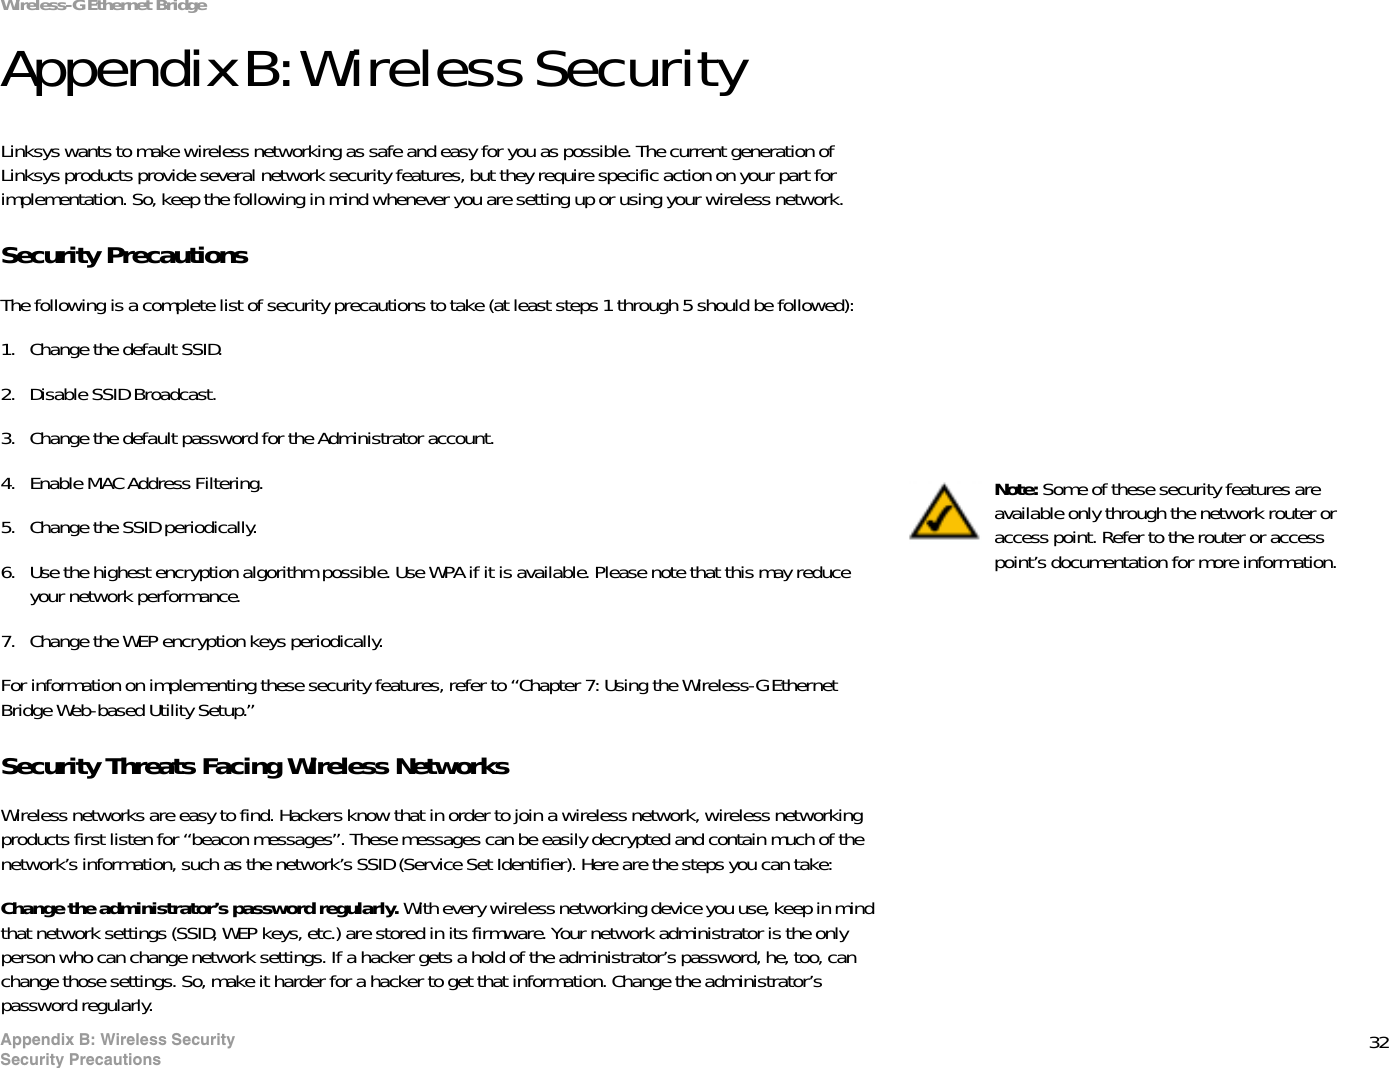 32Appendix B: Wireless SecuritySecurity PrecautionsWireless-G Ethernet BridgeAppendix B: Wireless SecurityLinksys wants to make wireless networking as safe and easy for you as possible. The current generation of Linksys products provide several network security features, but they require specific action on your part for implementation. So, keep the following in mind whenever you are setting up or using your wireless network.Security PrecautionsThe following is a complete list of security precautions to take (at least steps 1 through 5 should be followed):1. Change the default SSID. 2. Disable SSID Broadcast. 3. Change the default password for the Administrator account. 4. Enable MAC Address Filtering. 5. Change the SSID periodically. 6. Use the highest encryption algorithm possible. Use WPA if it is available. Please note that this may reduce your network performance. 7. Change the WEP encryption keys periodically. For information on implementing these security features, refer to “Chapter 7: Using the Wireless-G Ethernet Bridge Web-based Utility Setup.”Security Threats Facing Wireless Networks Wireless networks are easy to find. Hackers know that in order to join a wireless network, wireless networking products first listen for “beacon messages”. These messages can be easily decrypted and contain much of the network’s information, such as the network’s SSID (Service Set Identifier). Here are the steps you can take:Change the administrator’s password regularly. With every wireless networking device you use, keep in mind that network settings (SSID, WEP keys, etc.) are stored in its firmware. Your network administrator is the only person who can change network settings. If a hacker gets a hold of the administrator’s password, he, too, can change those settings. So, make it harder for a hacker to get that information. Change the administrator’s password regularly.Note: Some of these security features are available only through the network router or access point. Refer to the router or access point’s documentation for more information.